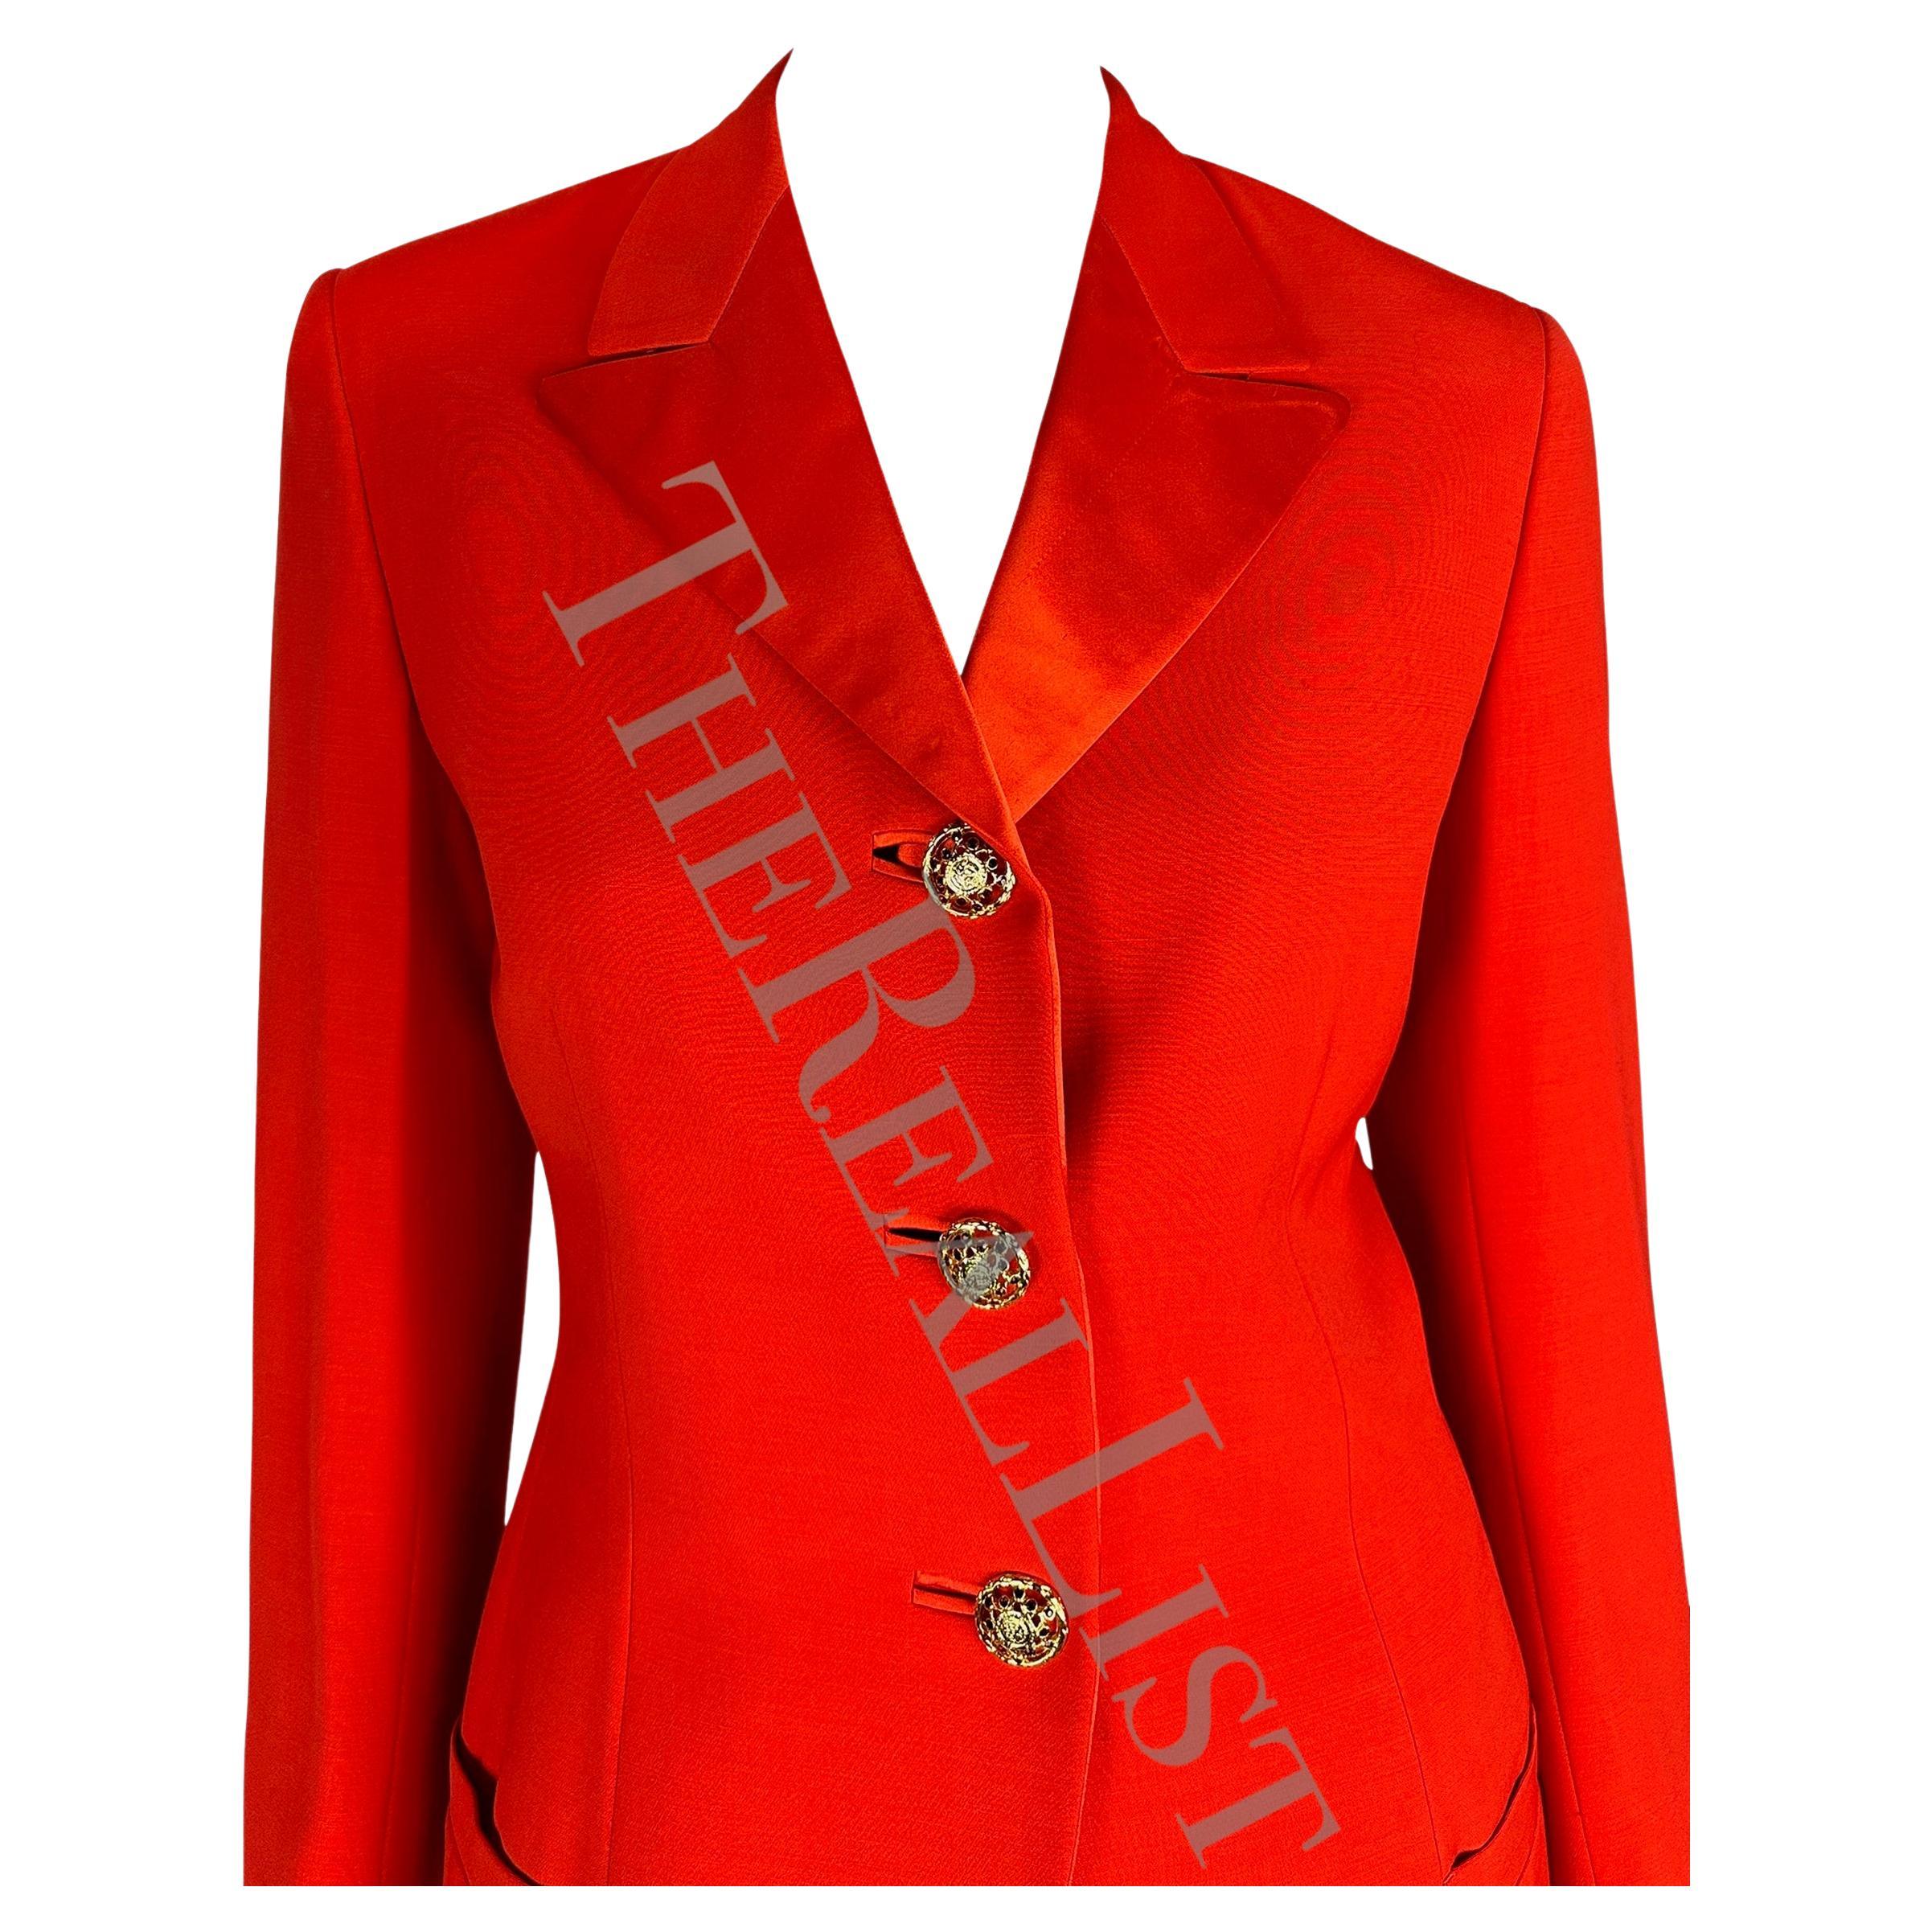 F/W 1992 Gianni Versace Couture Bondage (Miss S&M) Runway Collection Red Blazer In Excellent Condition For Sale In West Hollywood, CA